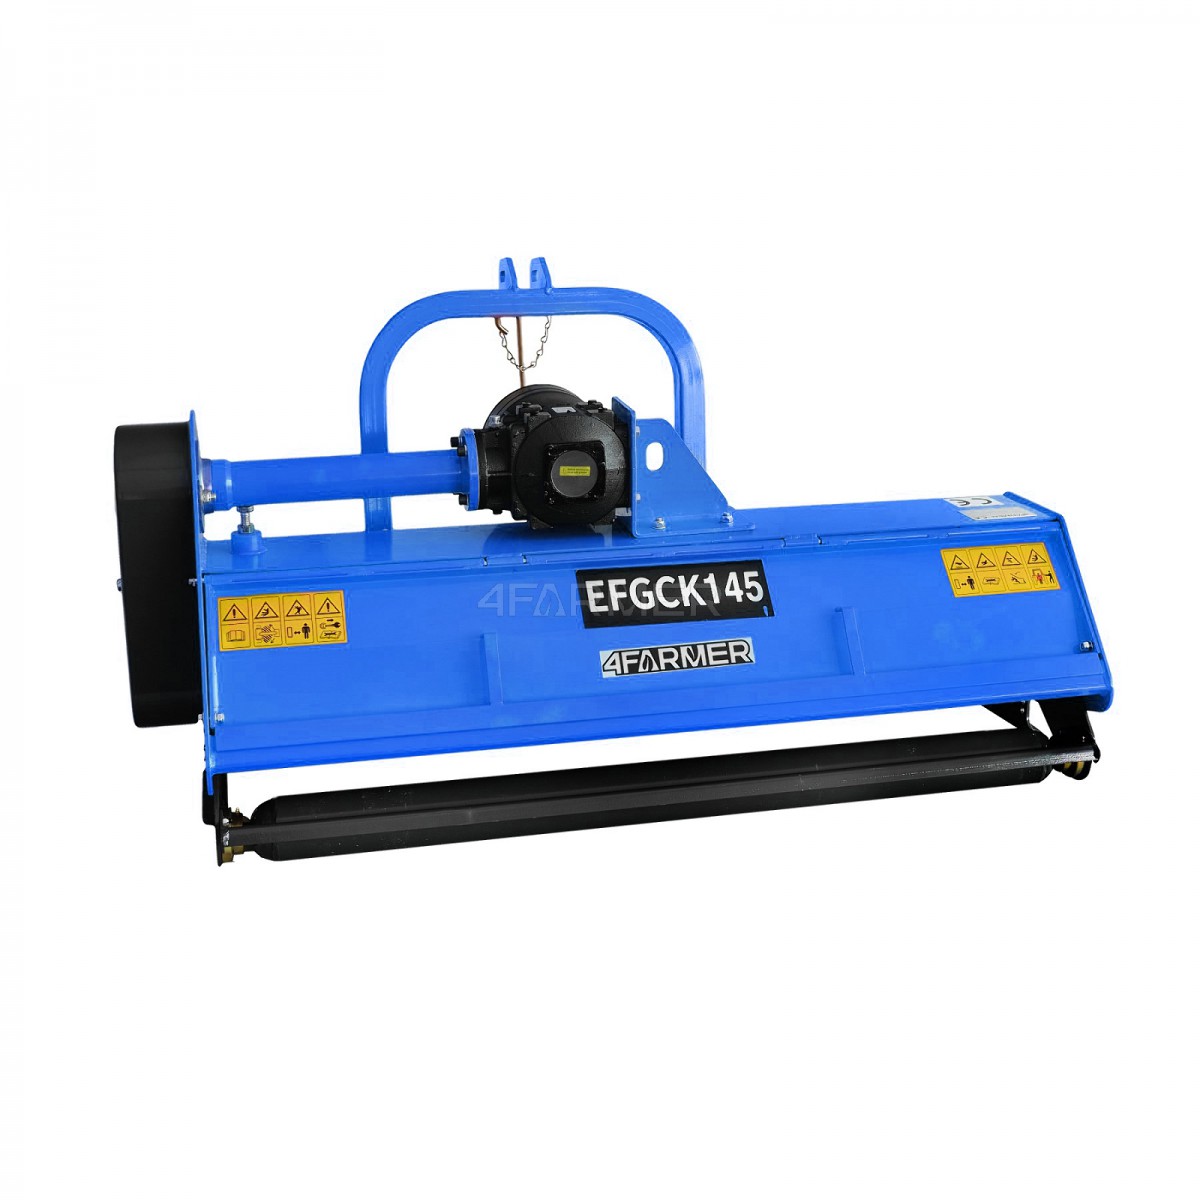 Flail mower EFGC-K 155 with opening flap 4FARMER - blue